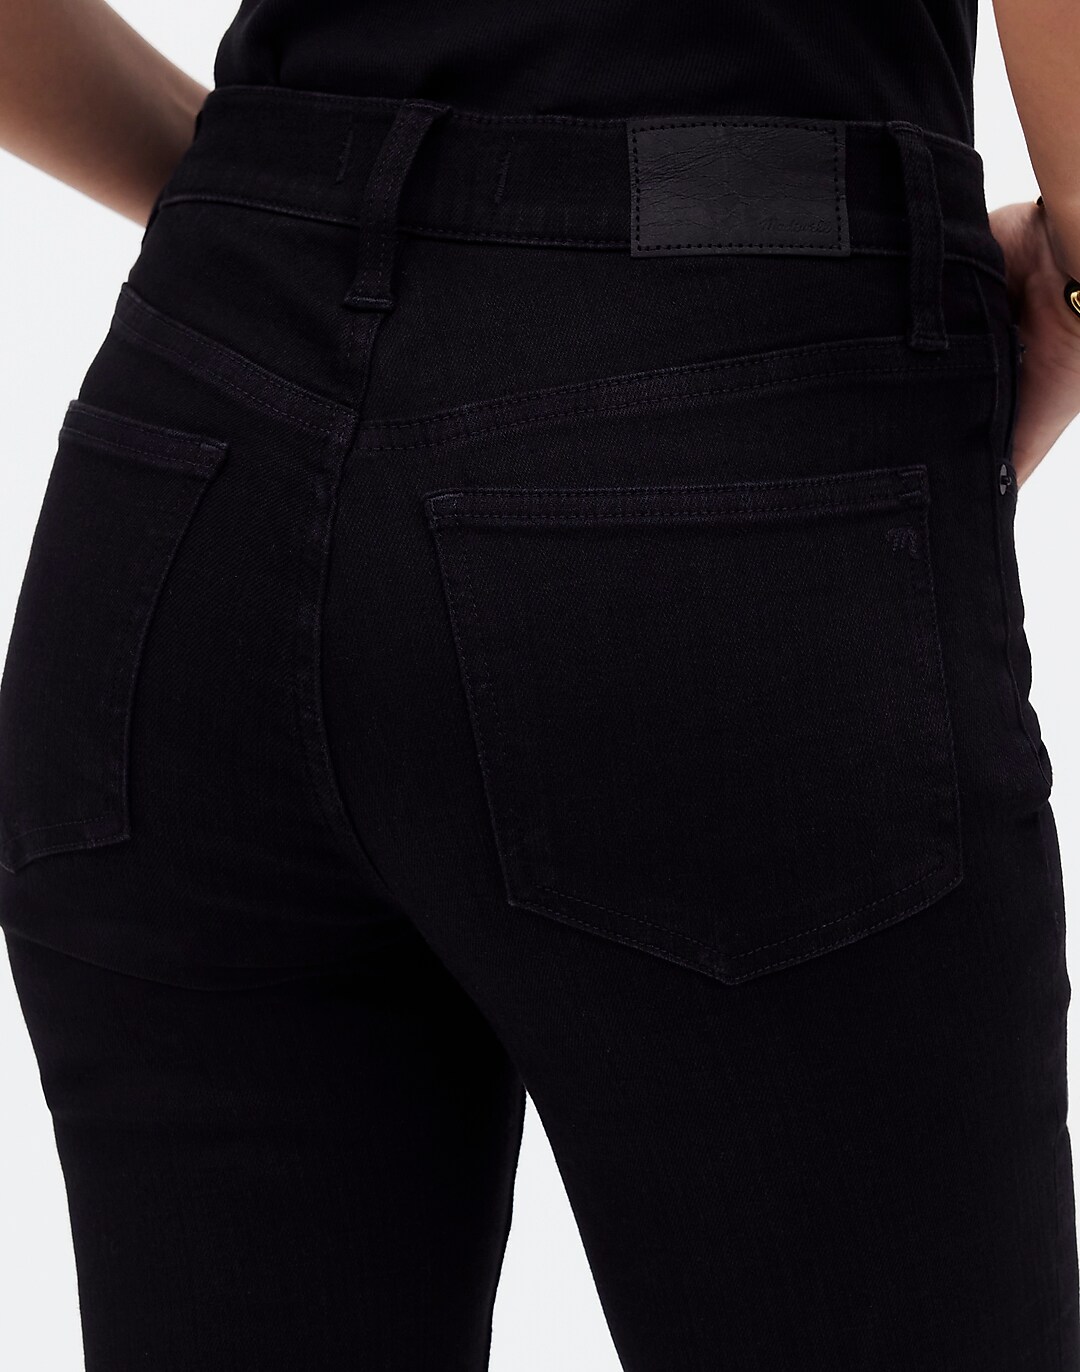 Kick Out Crop Jeans in Black Rinse Wash